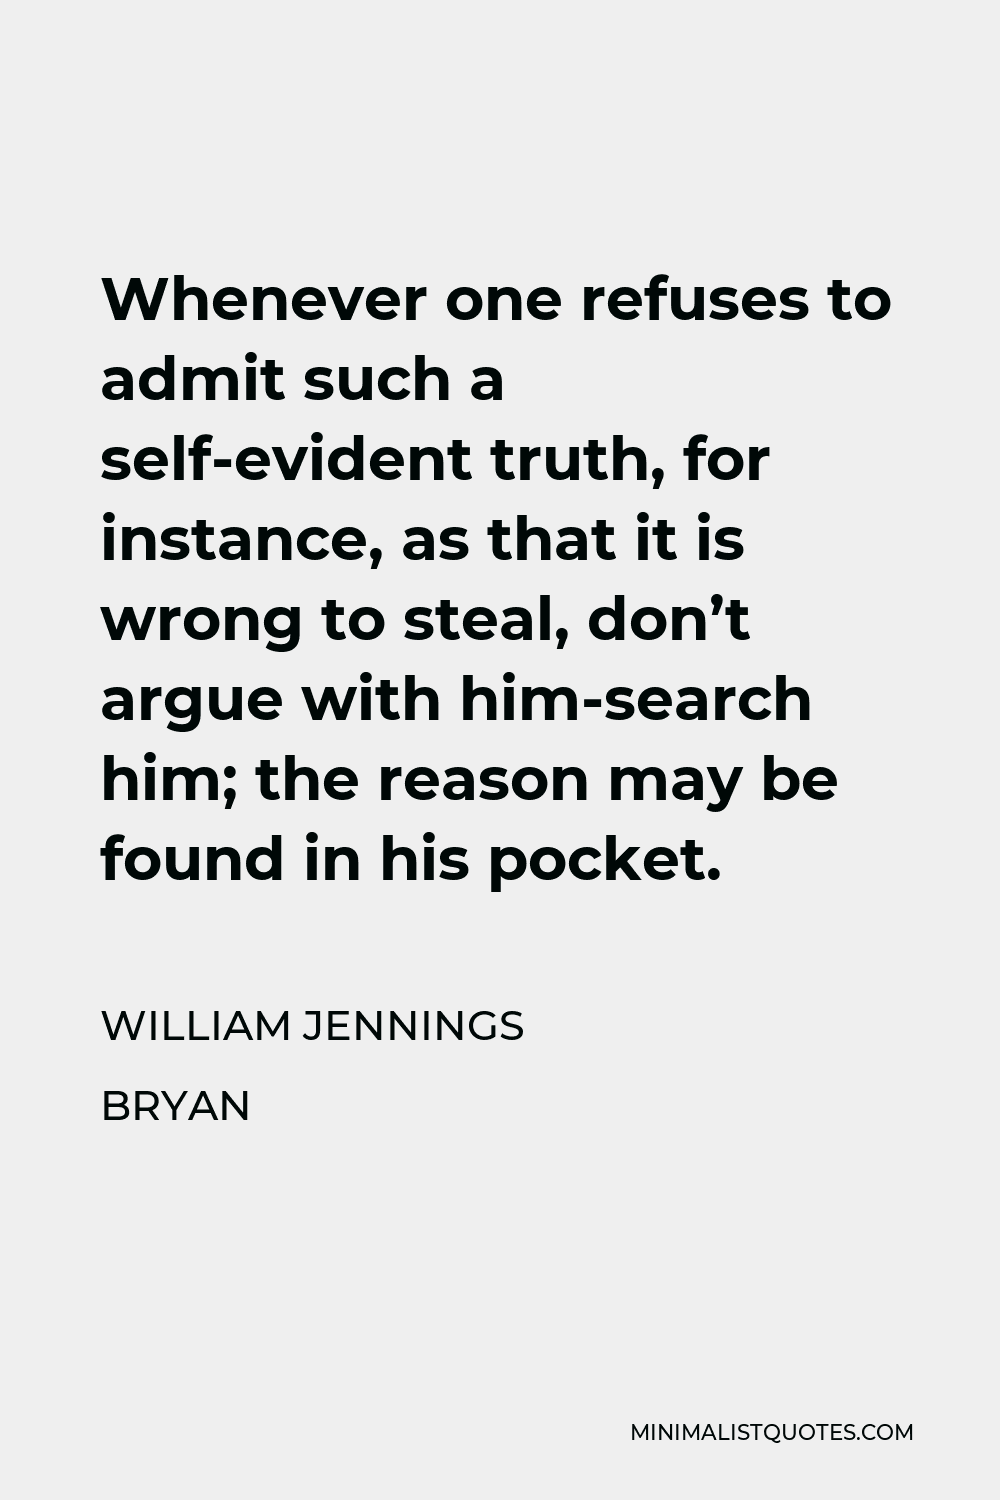 William Jennings Bryan Quote - Whenever one refuses to admit such a self-evident truth, for instance, as that it is wrong to steal, don’t argue with him-search him; the reason may be found in his pocket.